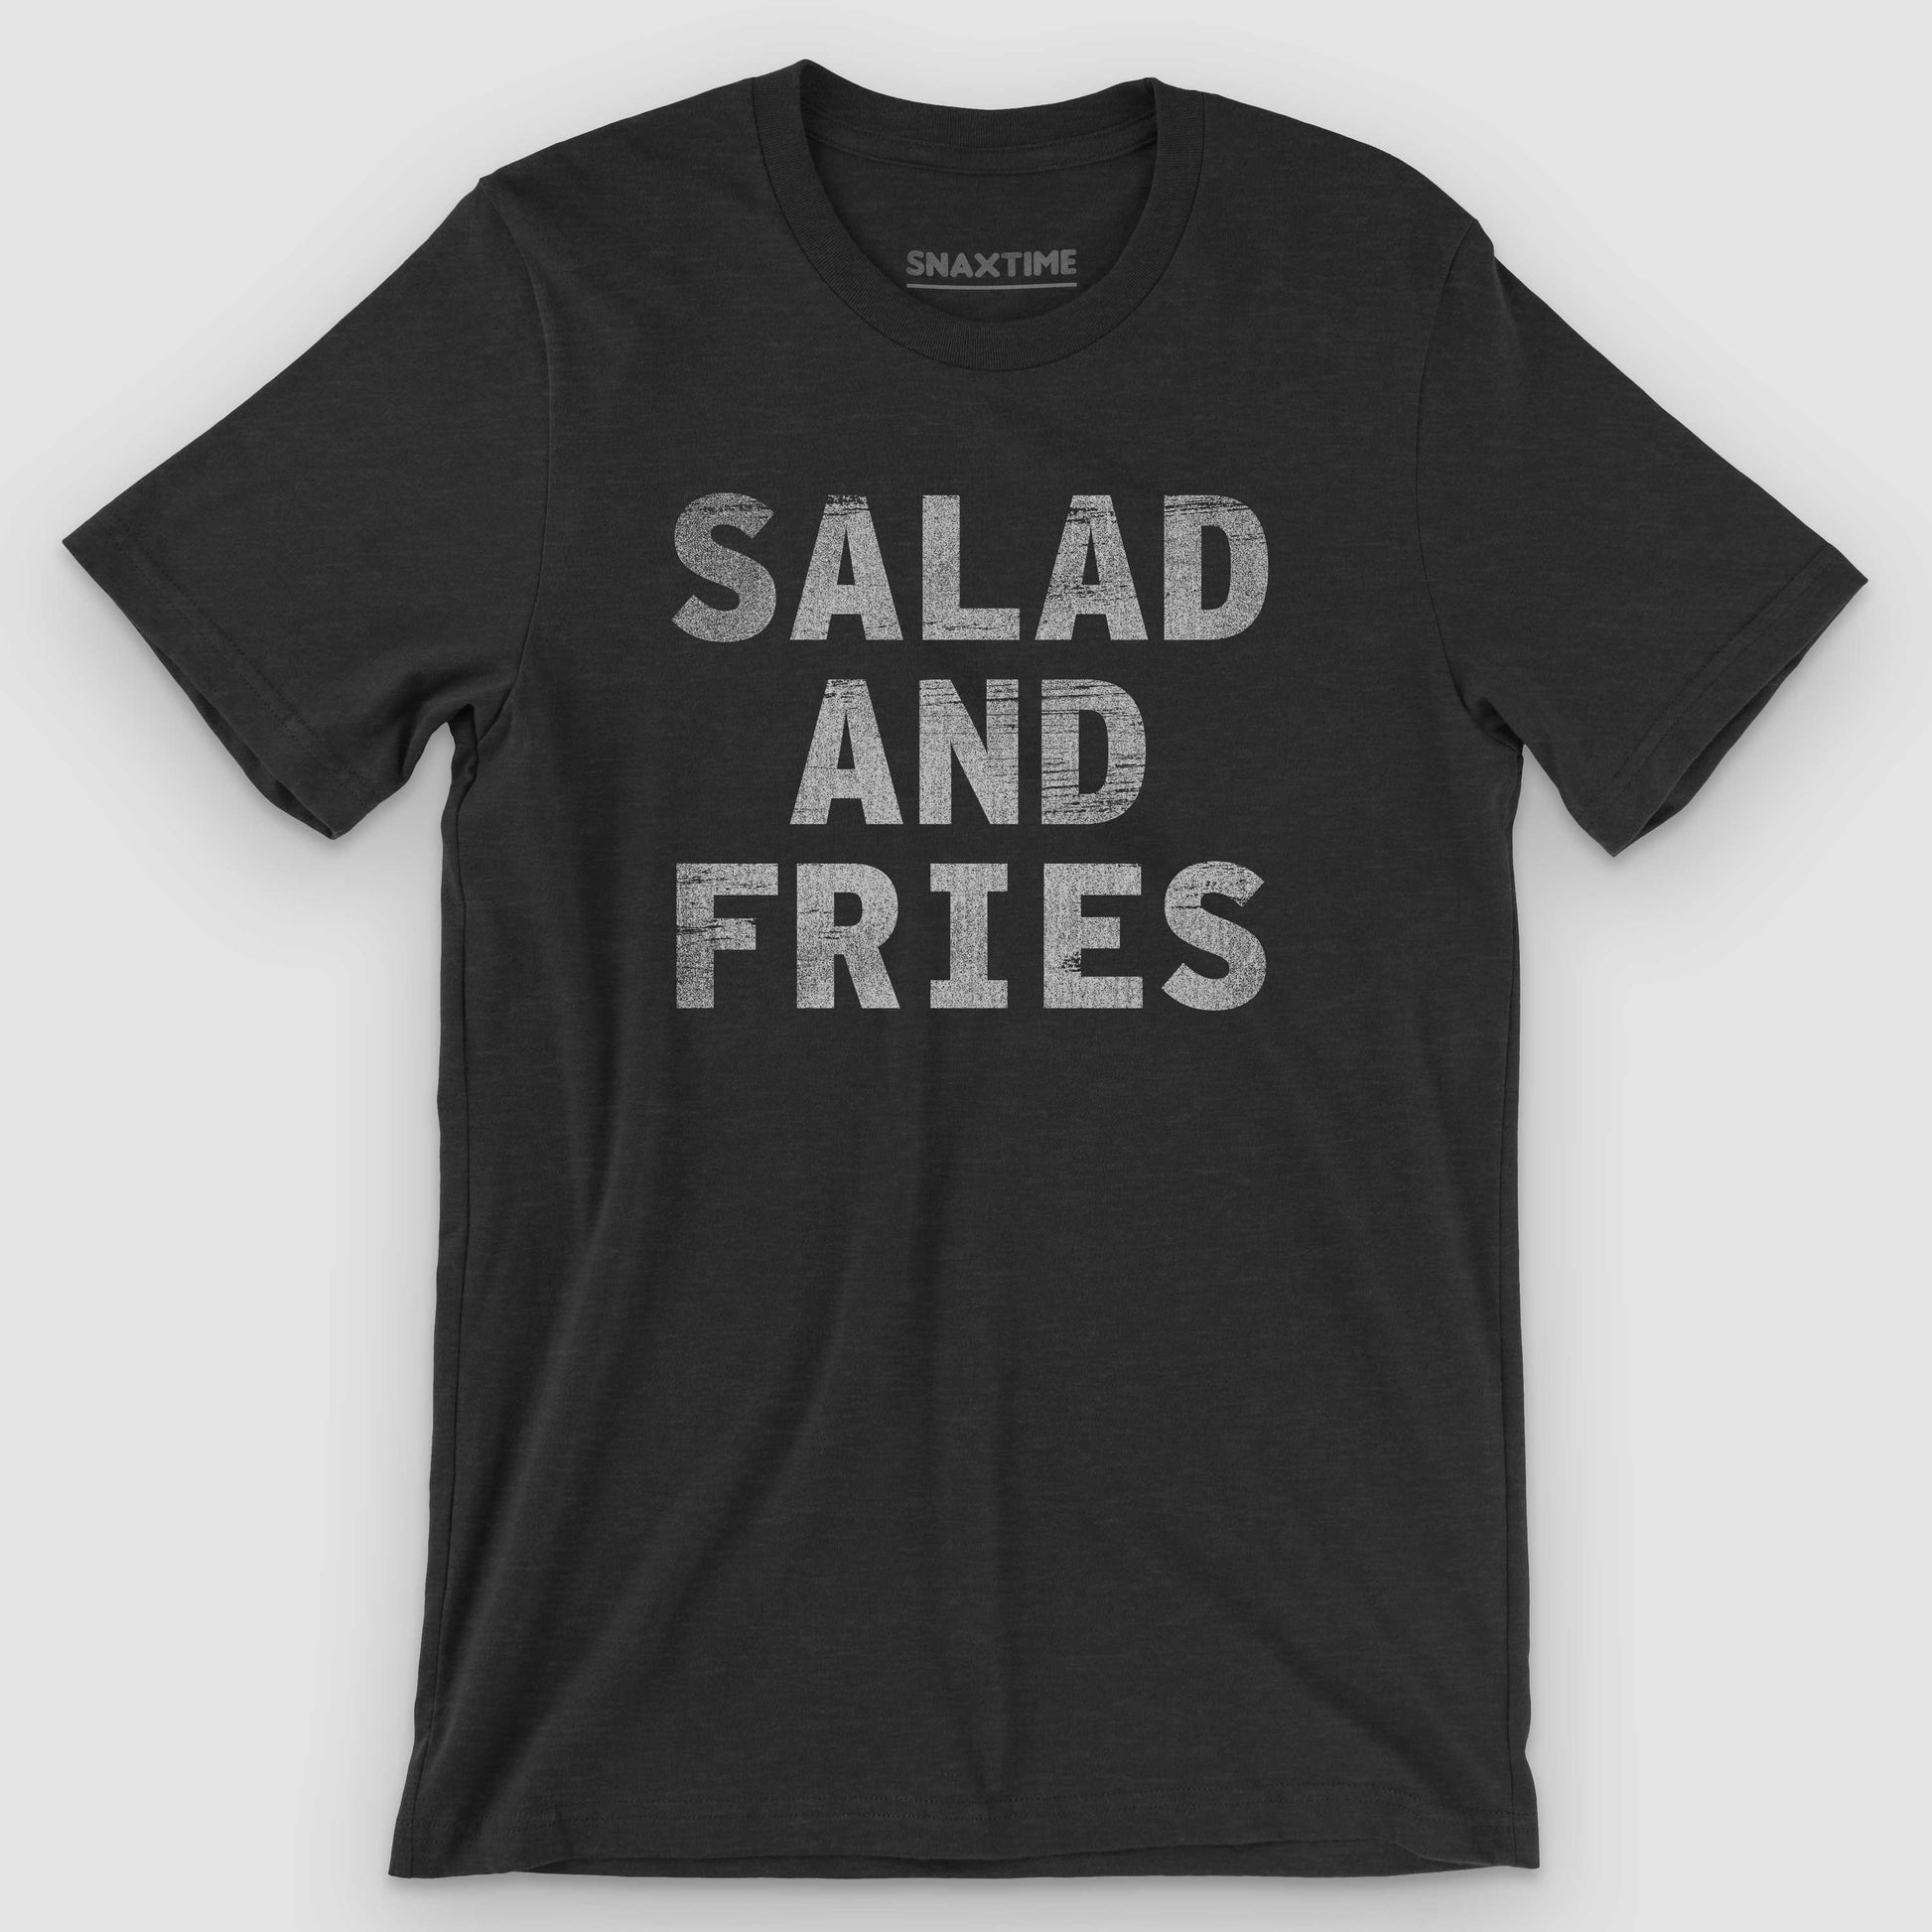 Black Heather Salad and Fries Graphic T-Shirt by Snaxtime